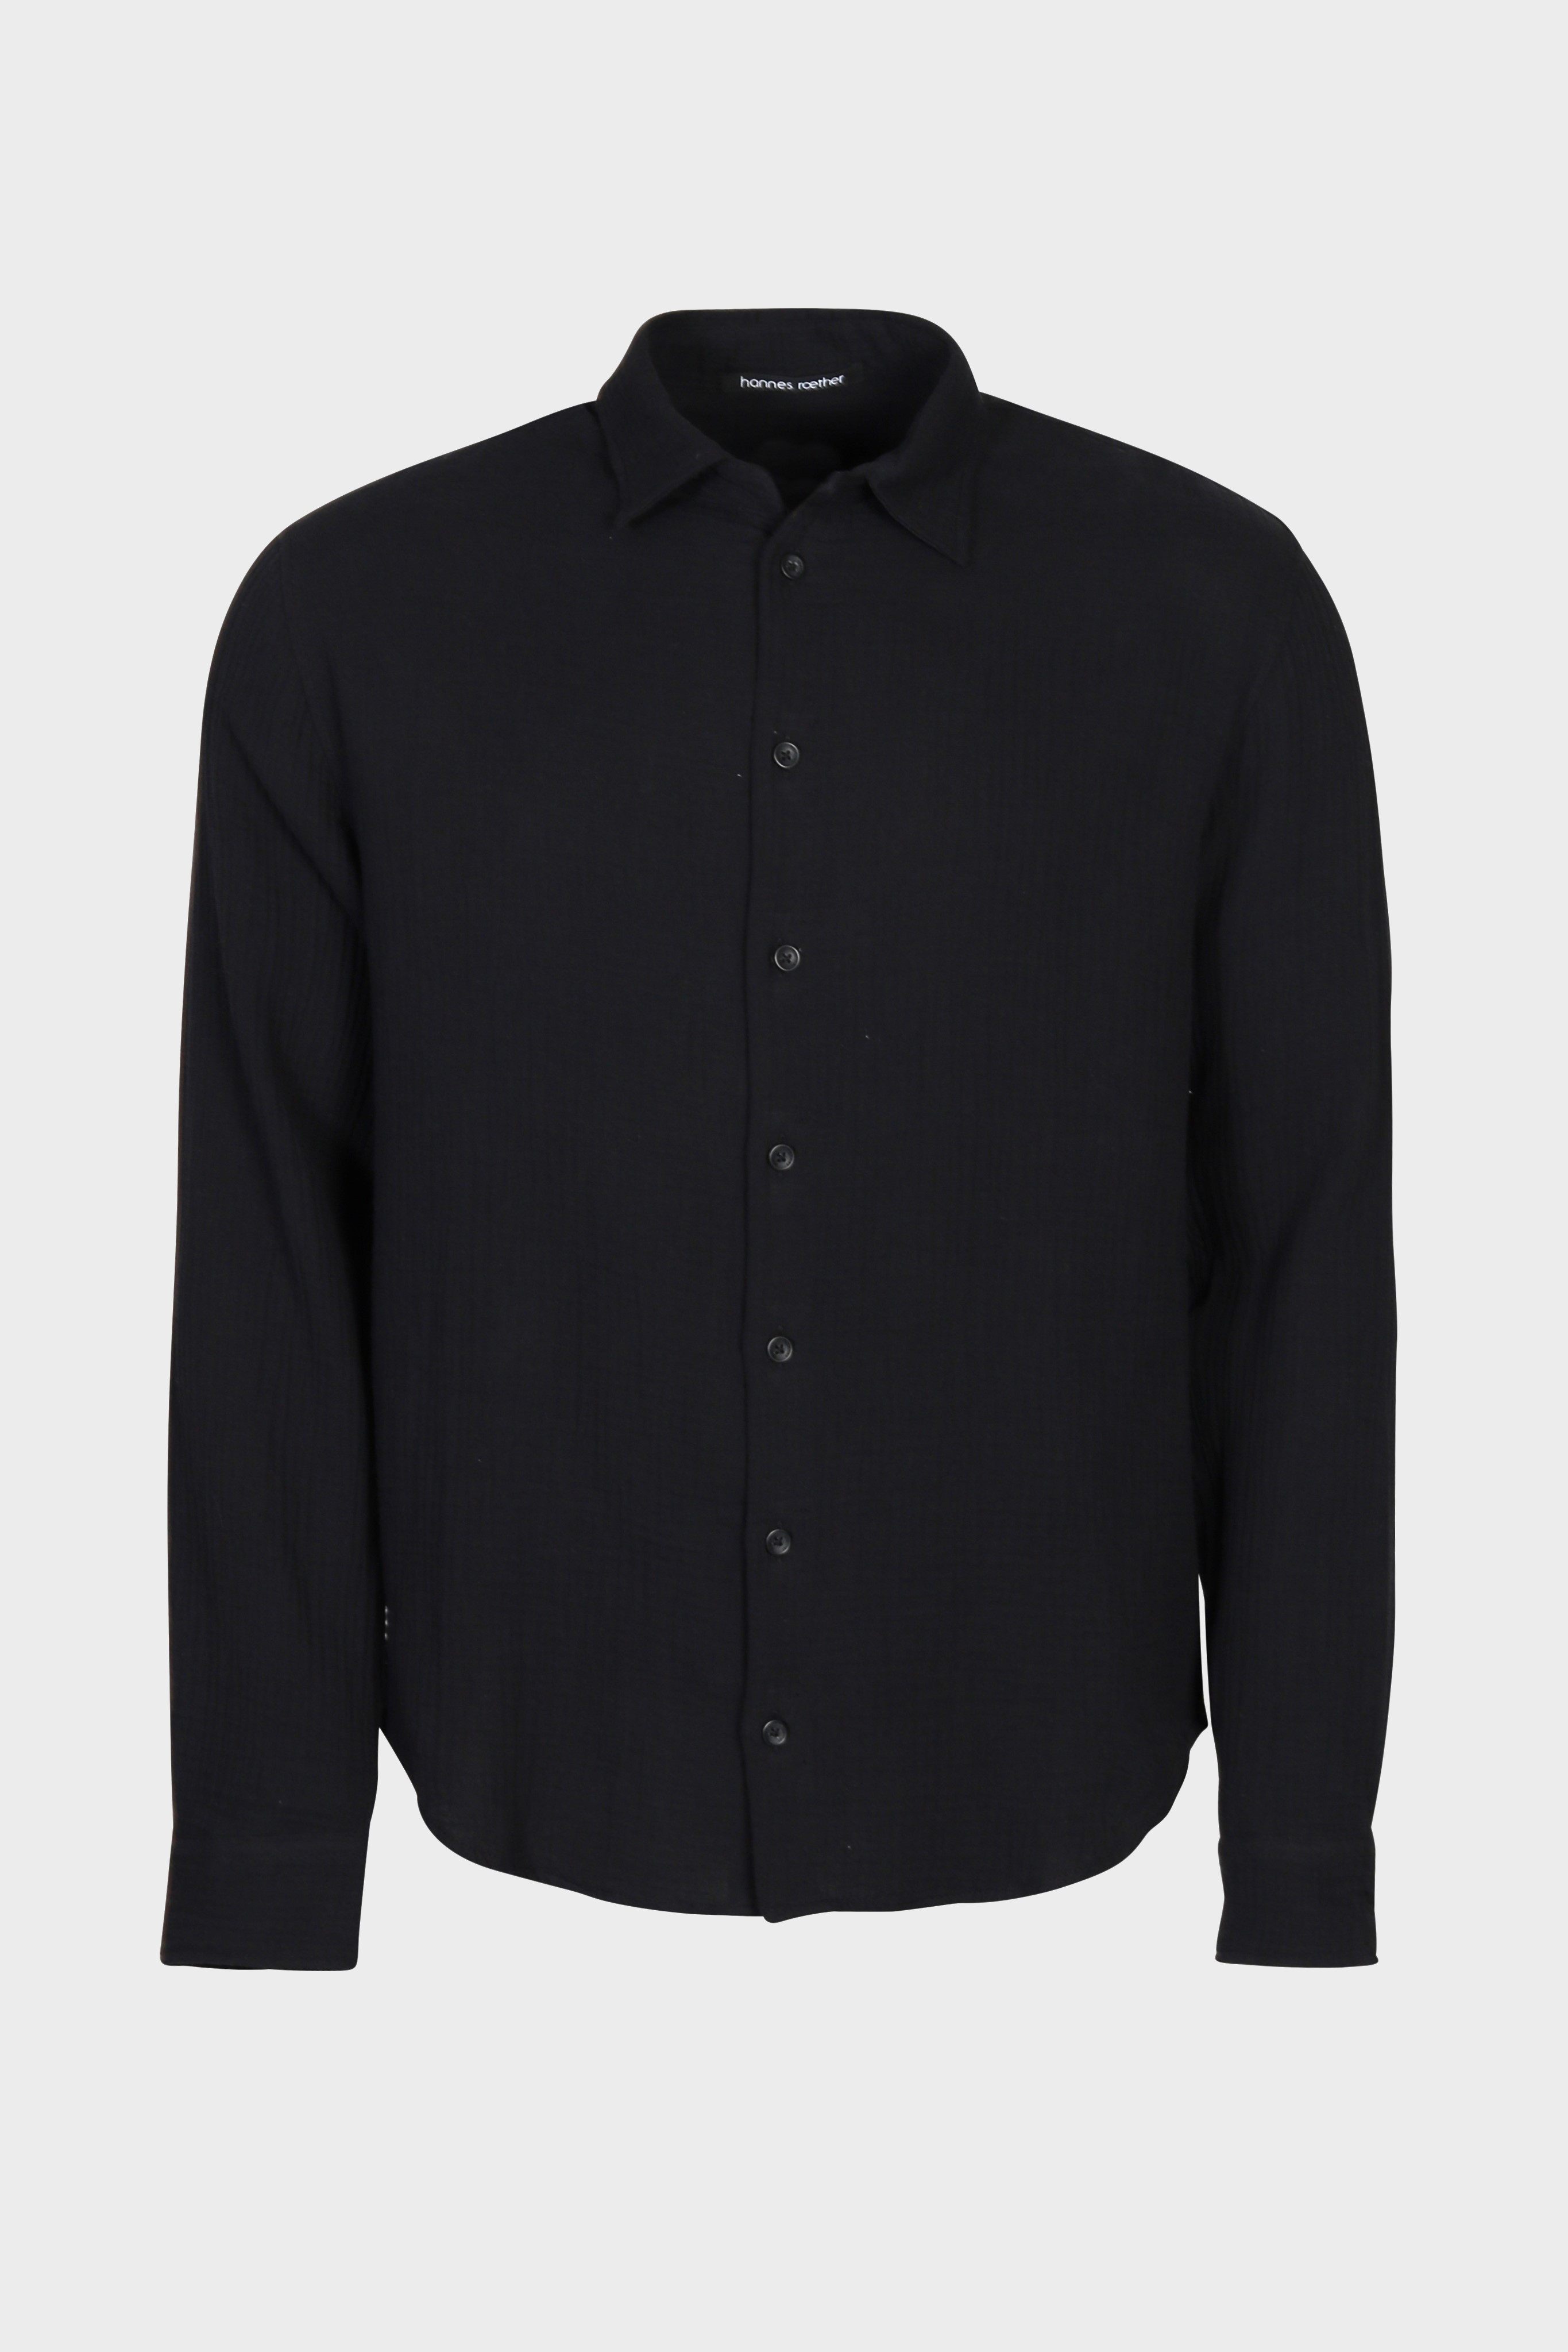 HANNES ROETHER Mousseline Shirt in Black XL